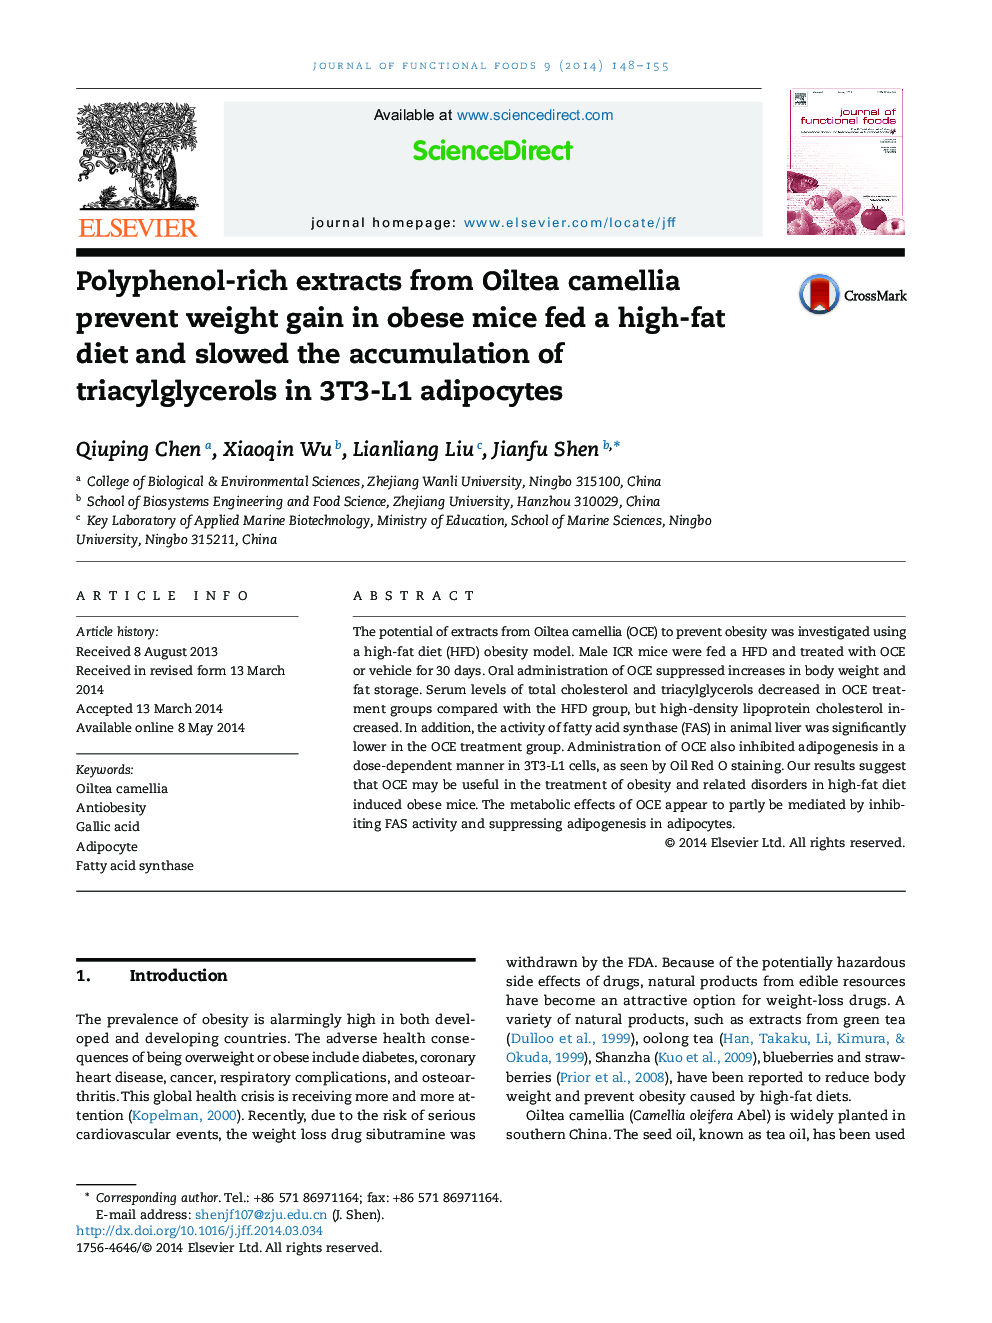 Polyphenol-rich extracts from Oiltea camellia prevent weight gain in obese mice fed a high-fat diet and slowed the accumulation of triacylglycerols in 3T3-L1 adipocytes